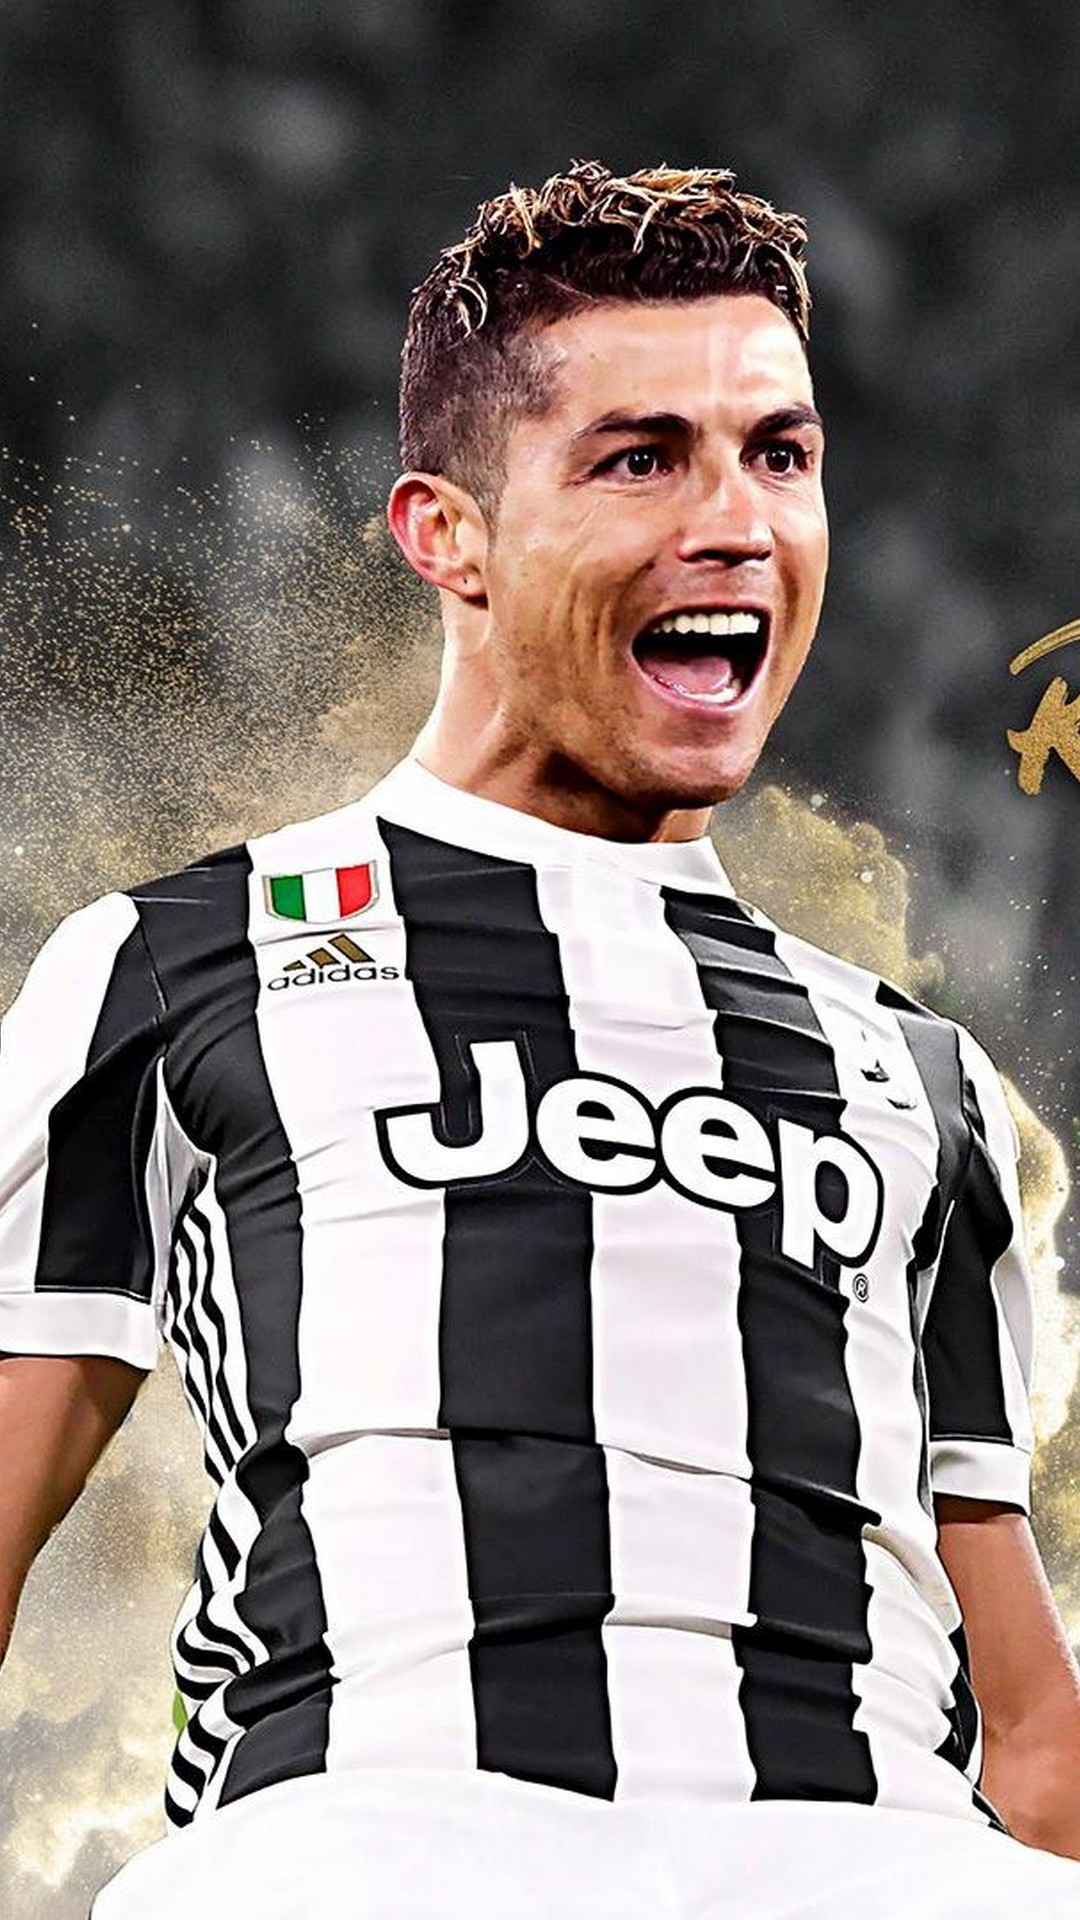 CR7 Juventus Wallpaper Android with resolution 1080X1920 pixel. You can make this wallpaper for your Android backgrounds, Tablet, Smartphones Screensavers and Mobile Phone Lock Screen